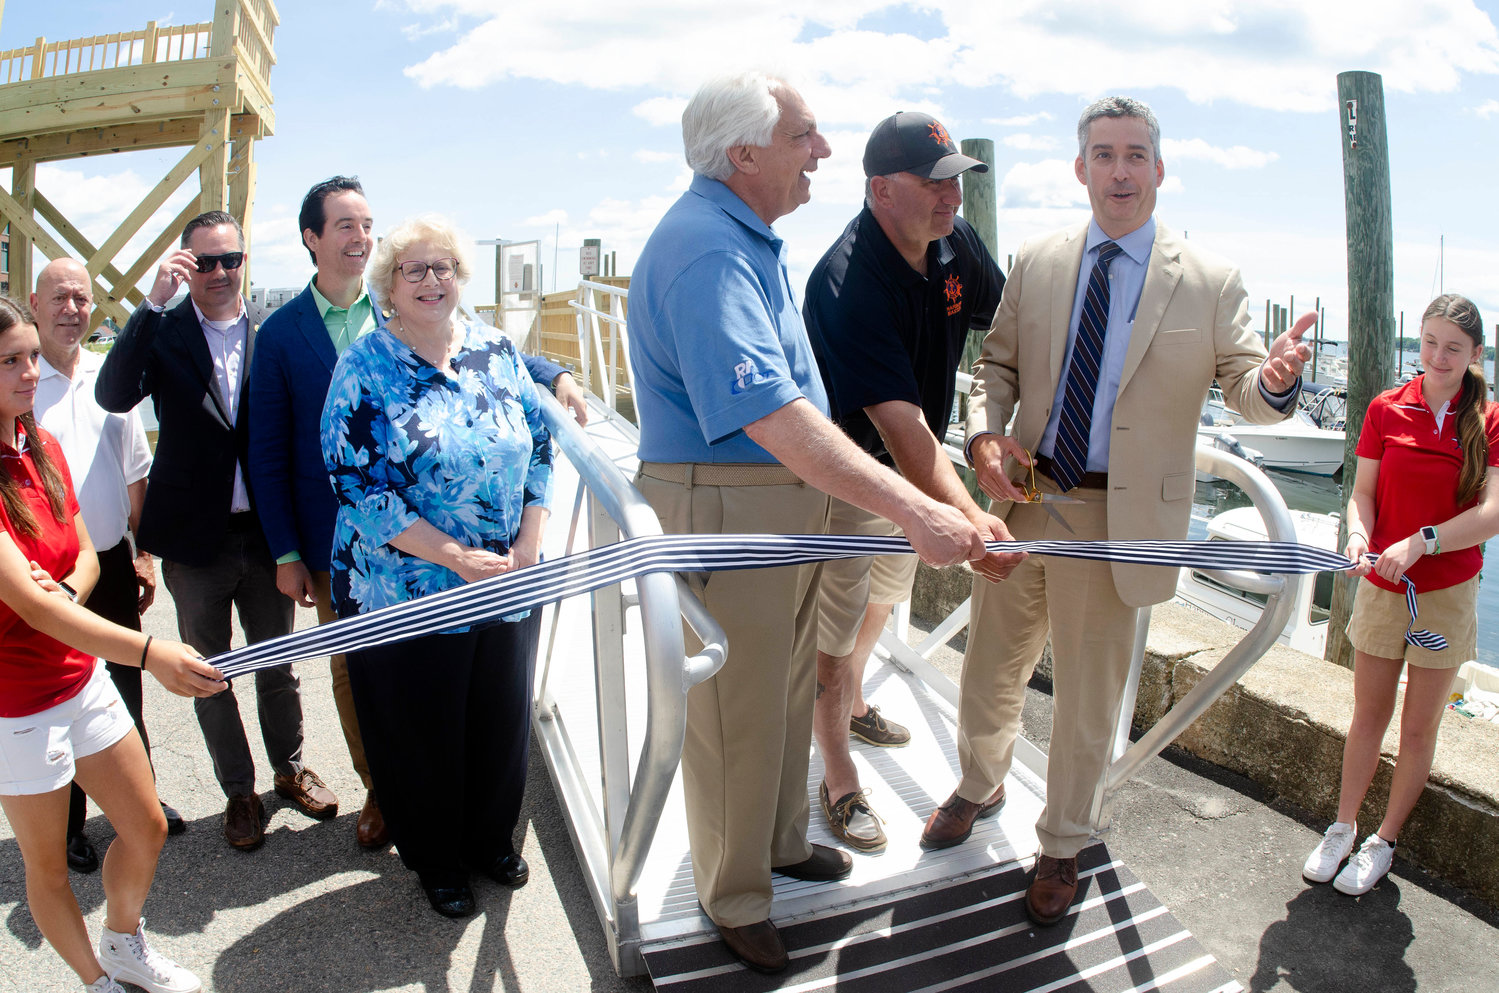 Bristol marina employees hold onto the ribbon as town councilors Tony Teixeira, Aaron Ley, Tim Sweeney, Mary Parella look on as DOT director Peter Alviti Jr., harbormaster Gregg Marsili and town administrator Steve Contente cut the ribbon to open the new dock.